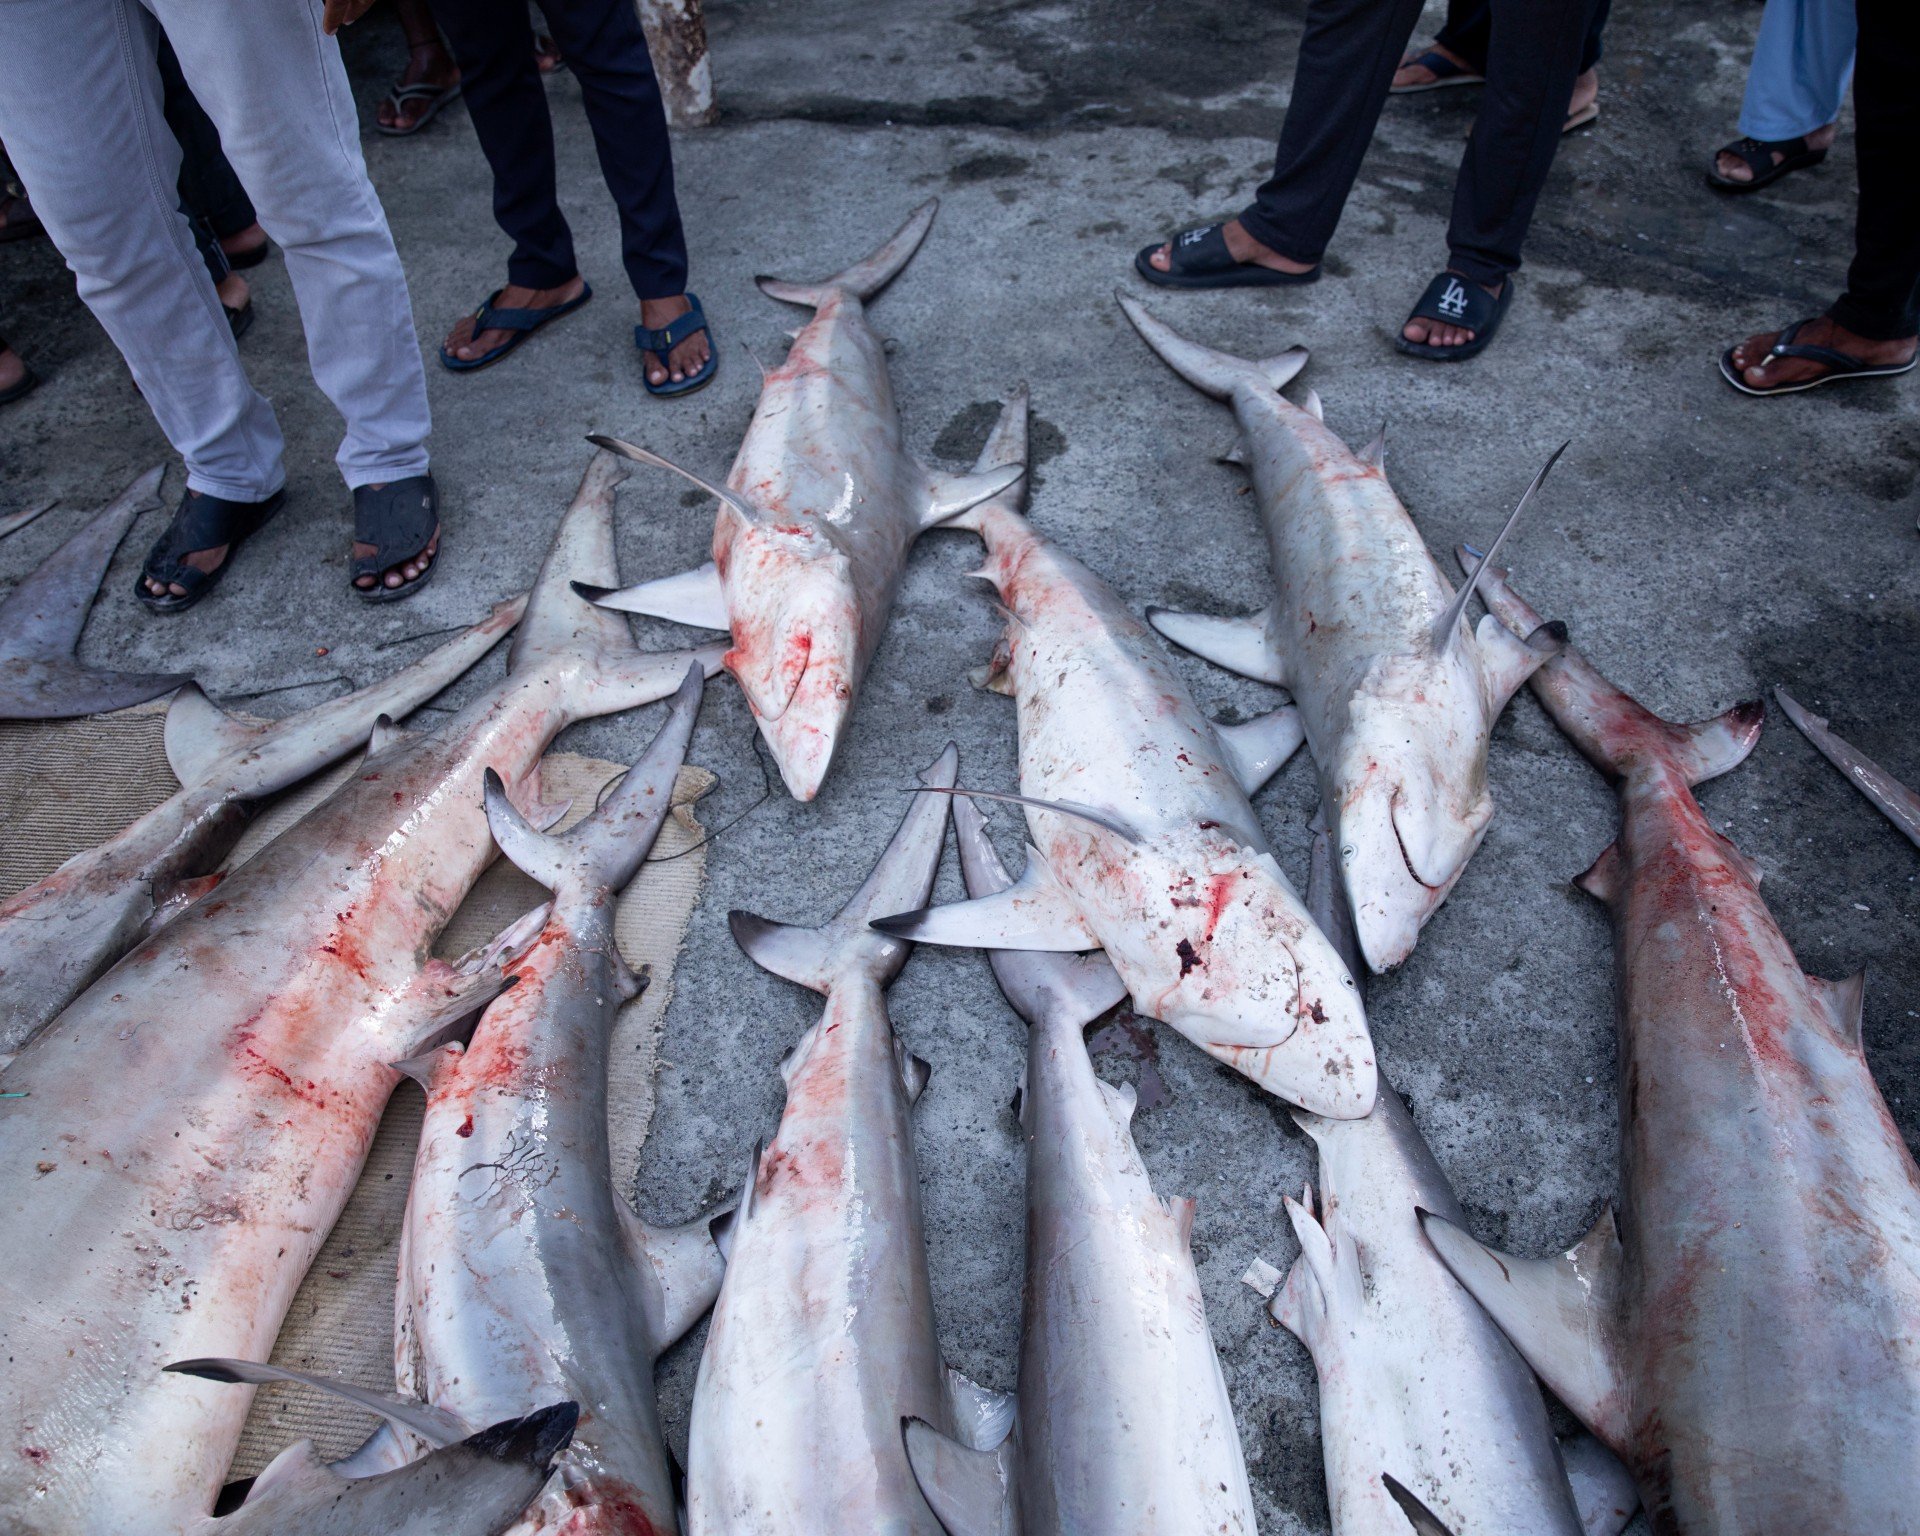 Fish traders and buyers bid to purchase whole sharks during a shark auction in Ajman (MEE/Reem Mohammed)